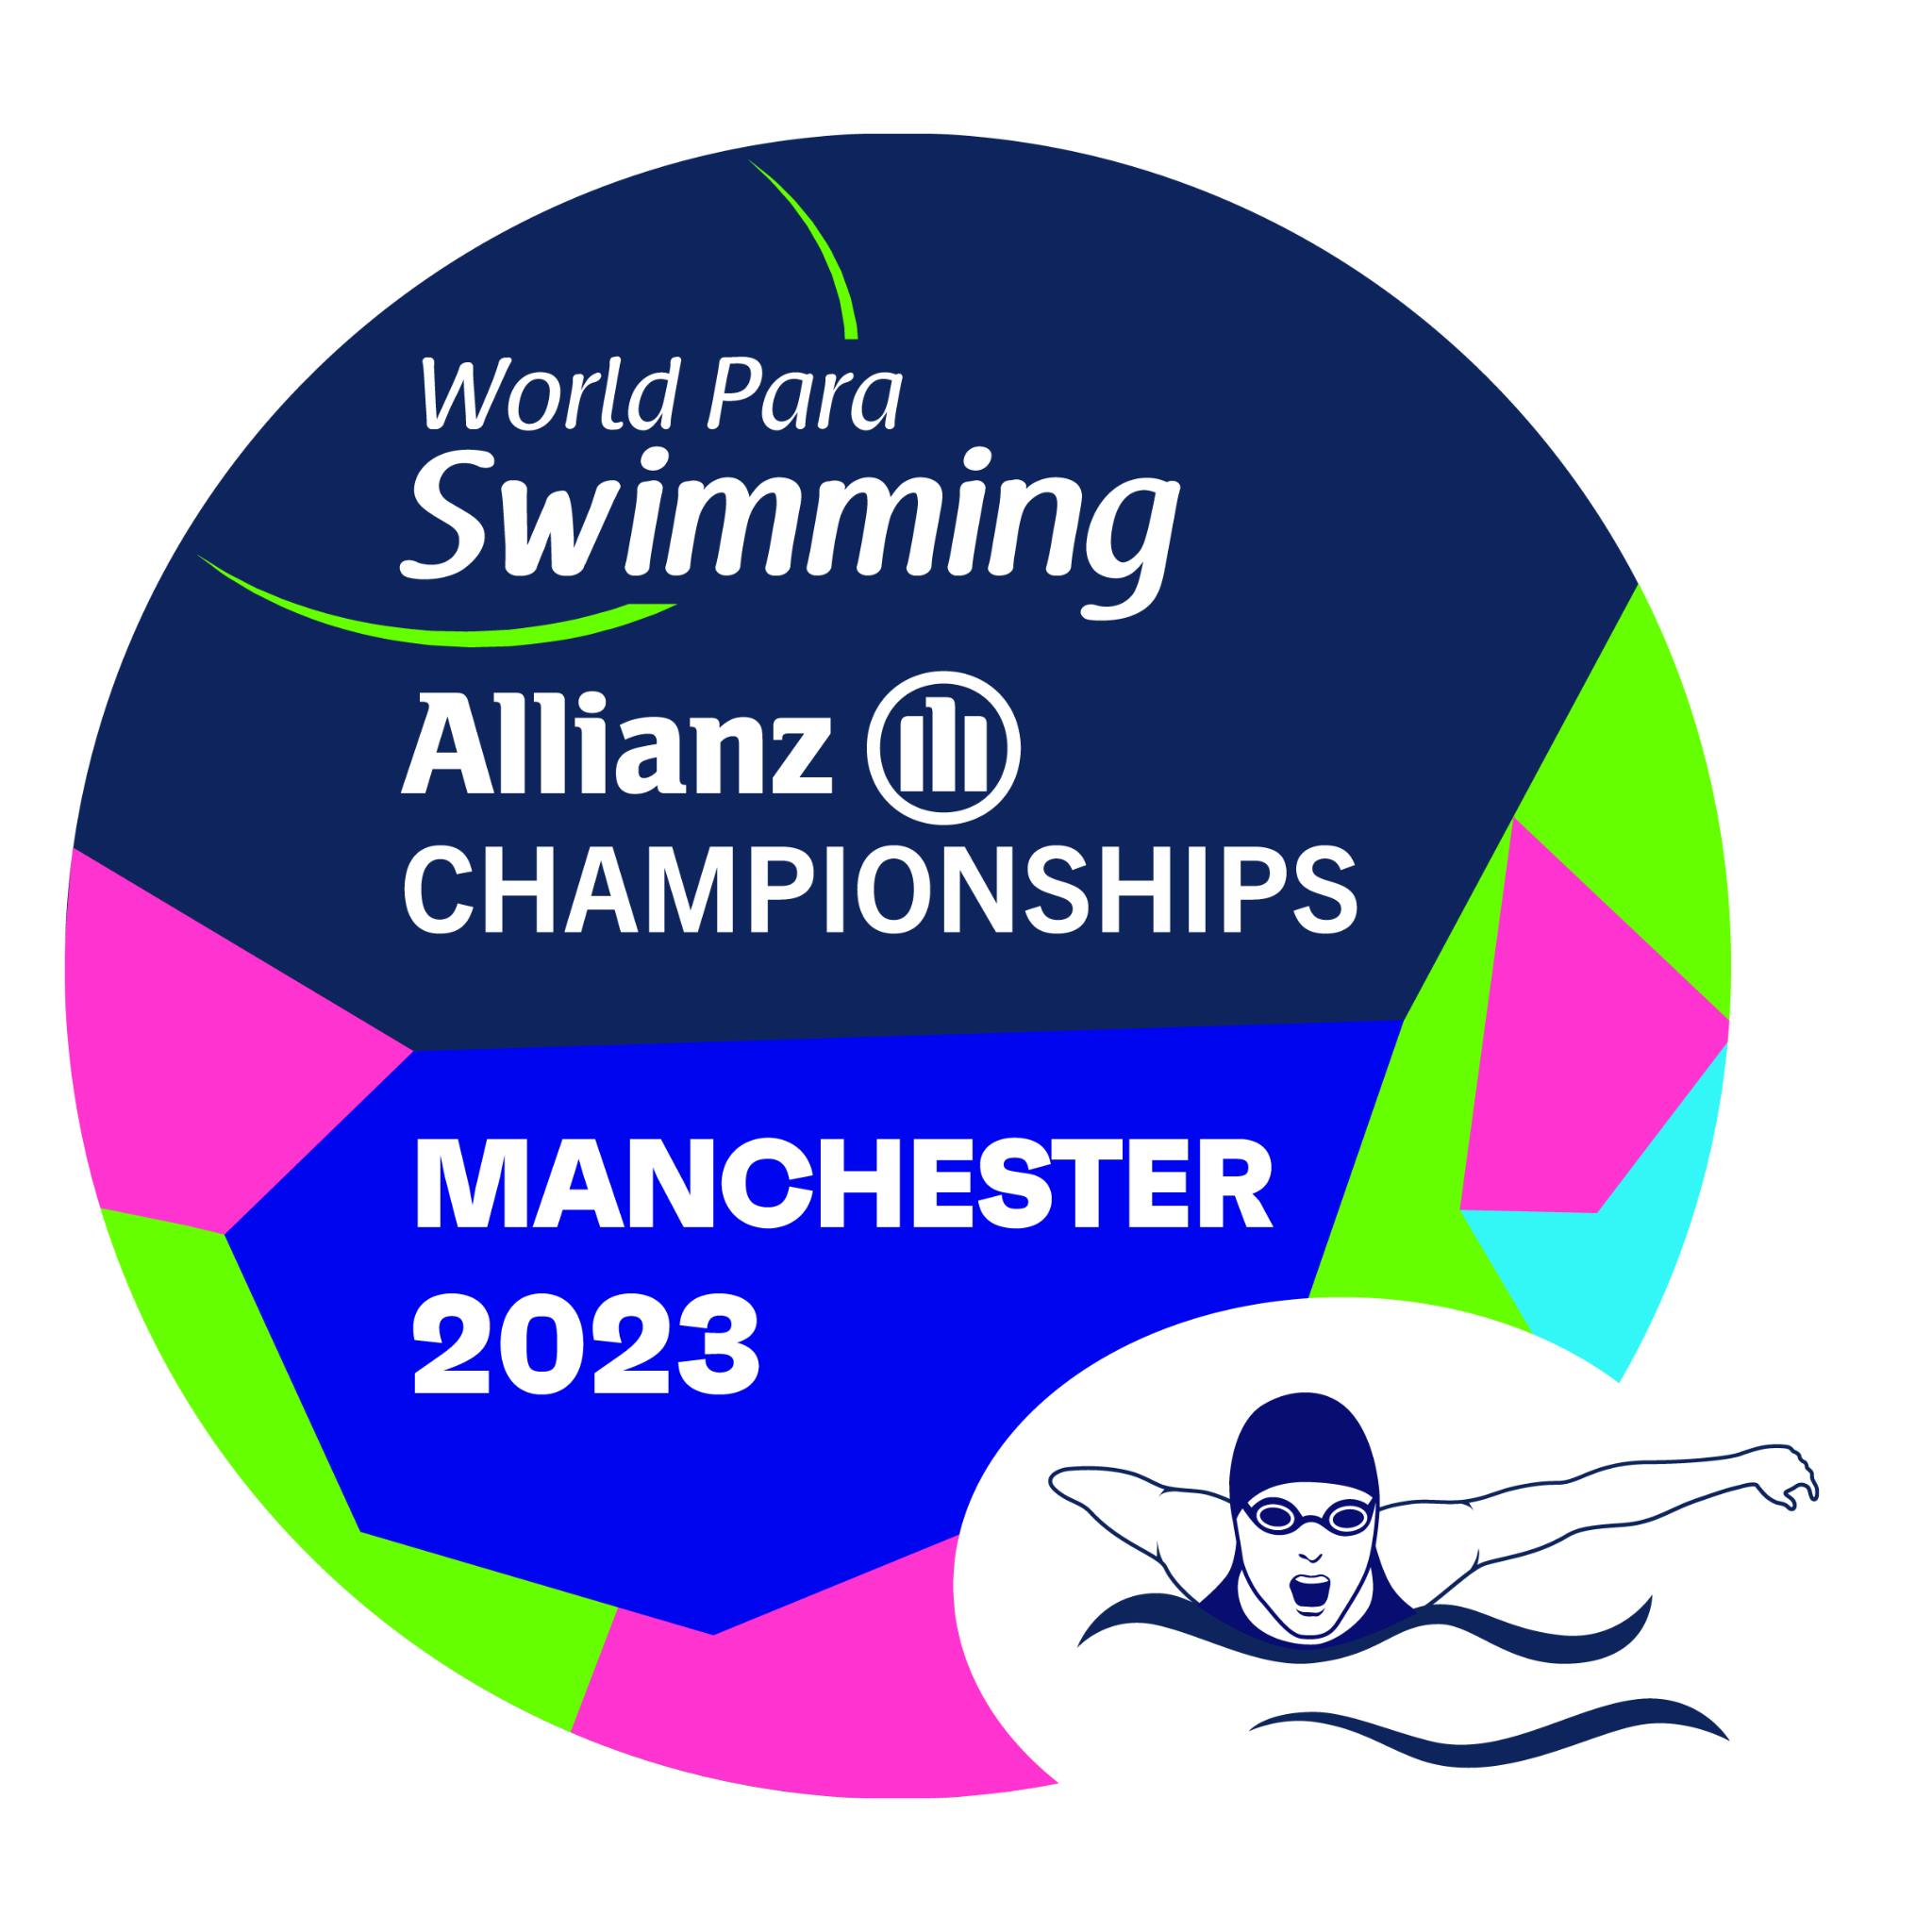 Allianz announced as Title Partner of the Manchester 2023 World